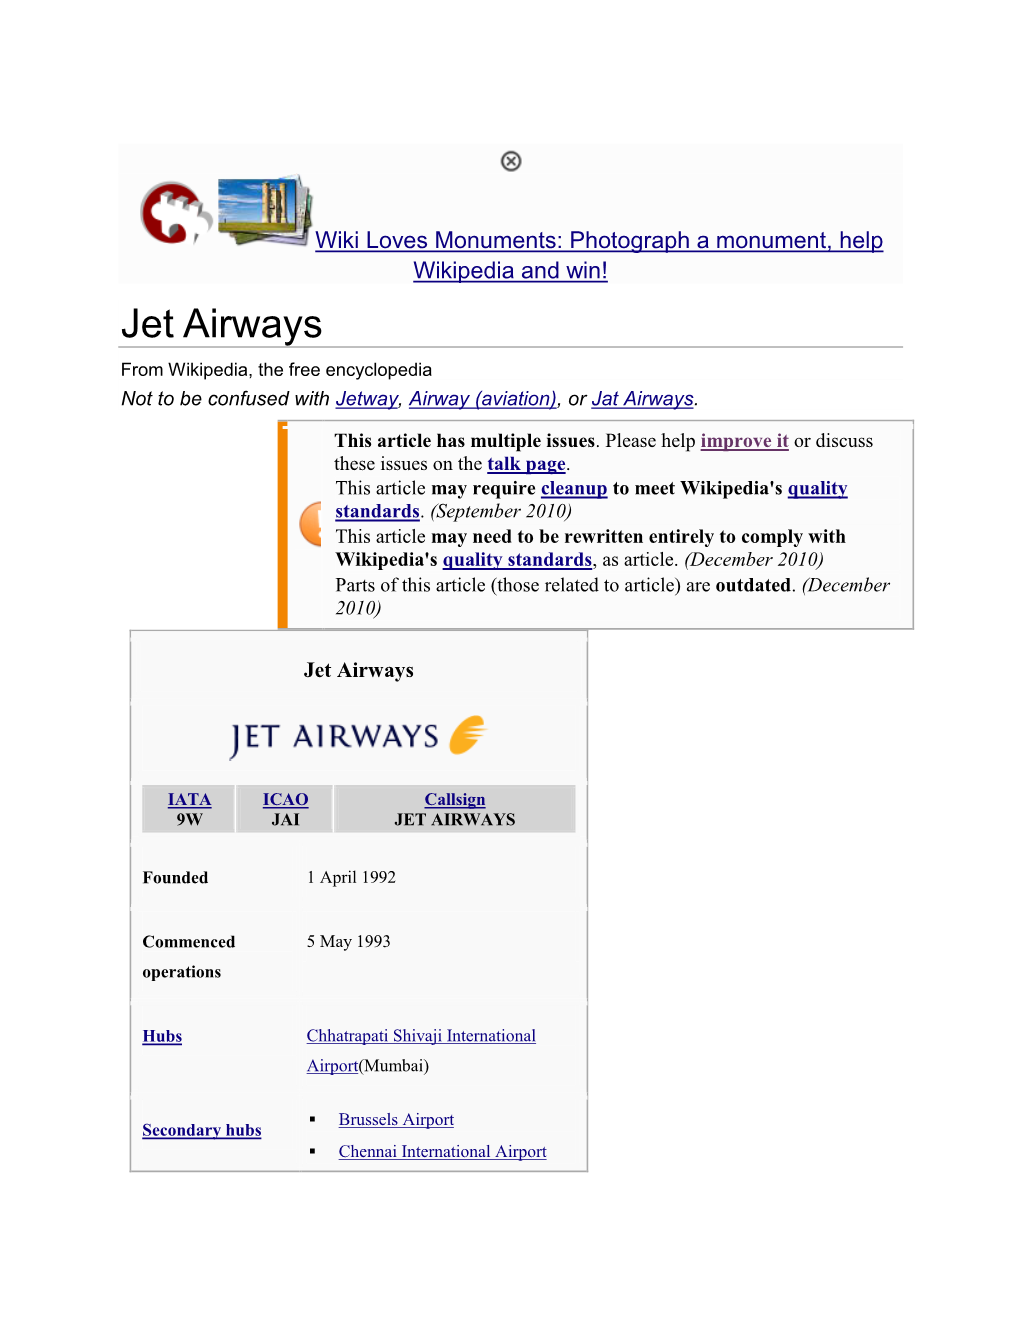 Jet Airways from Wikipedia, the Free Encyclopedia Not to Be Confused with Jetway, Airway (Aviation), Or Jat Airways